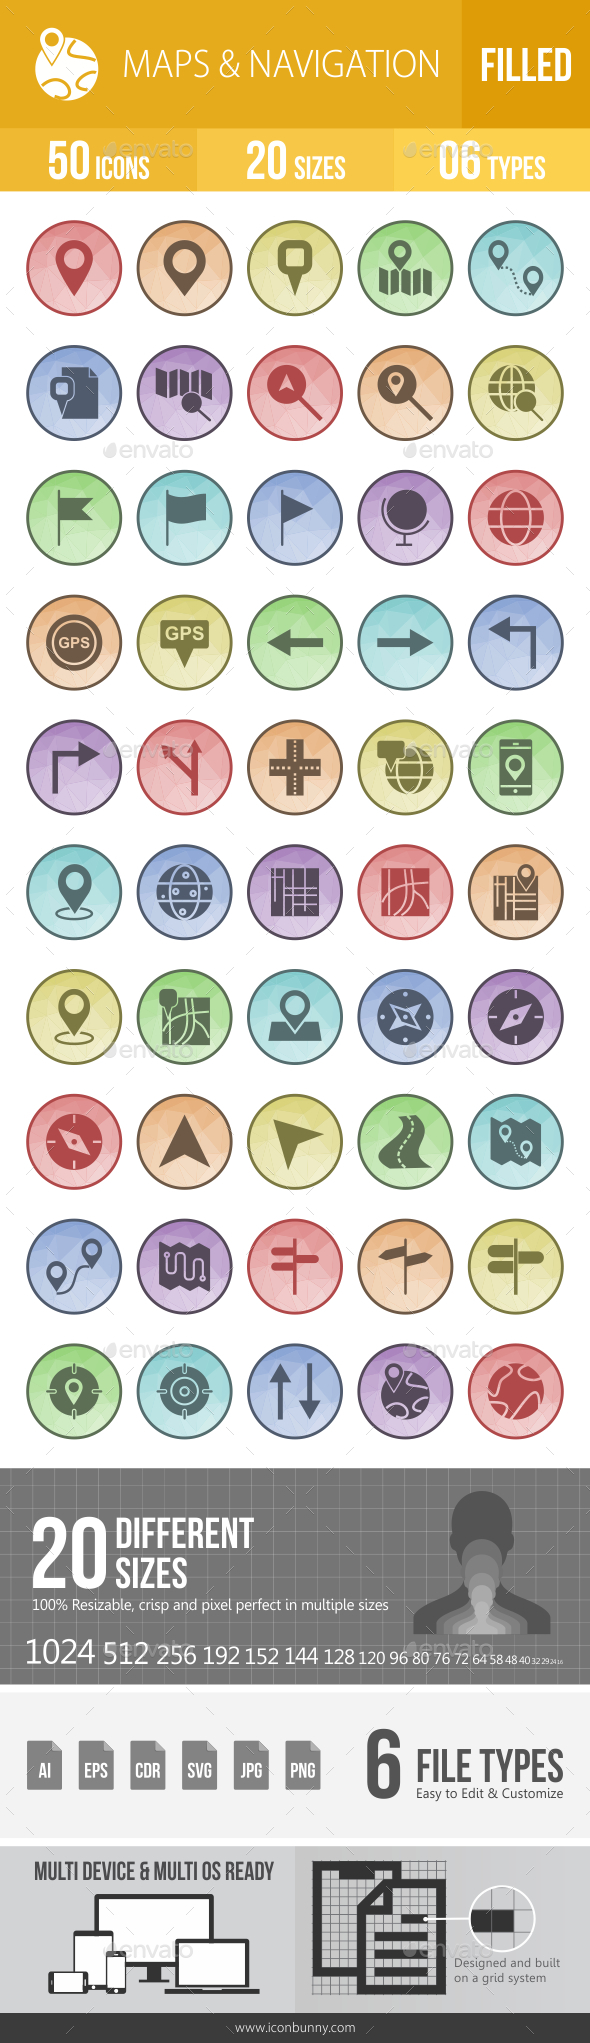 GraphicRiver 50 Maps & Navigation Filled Low Poly Icons 21176098